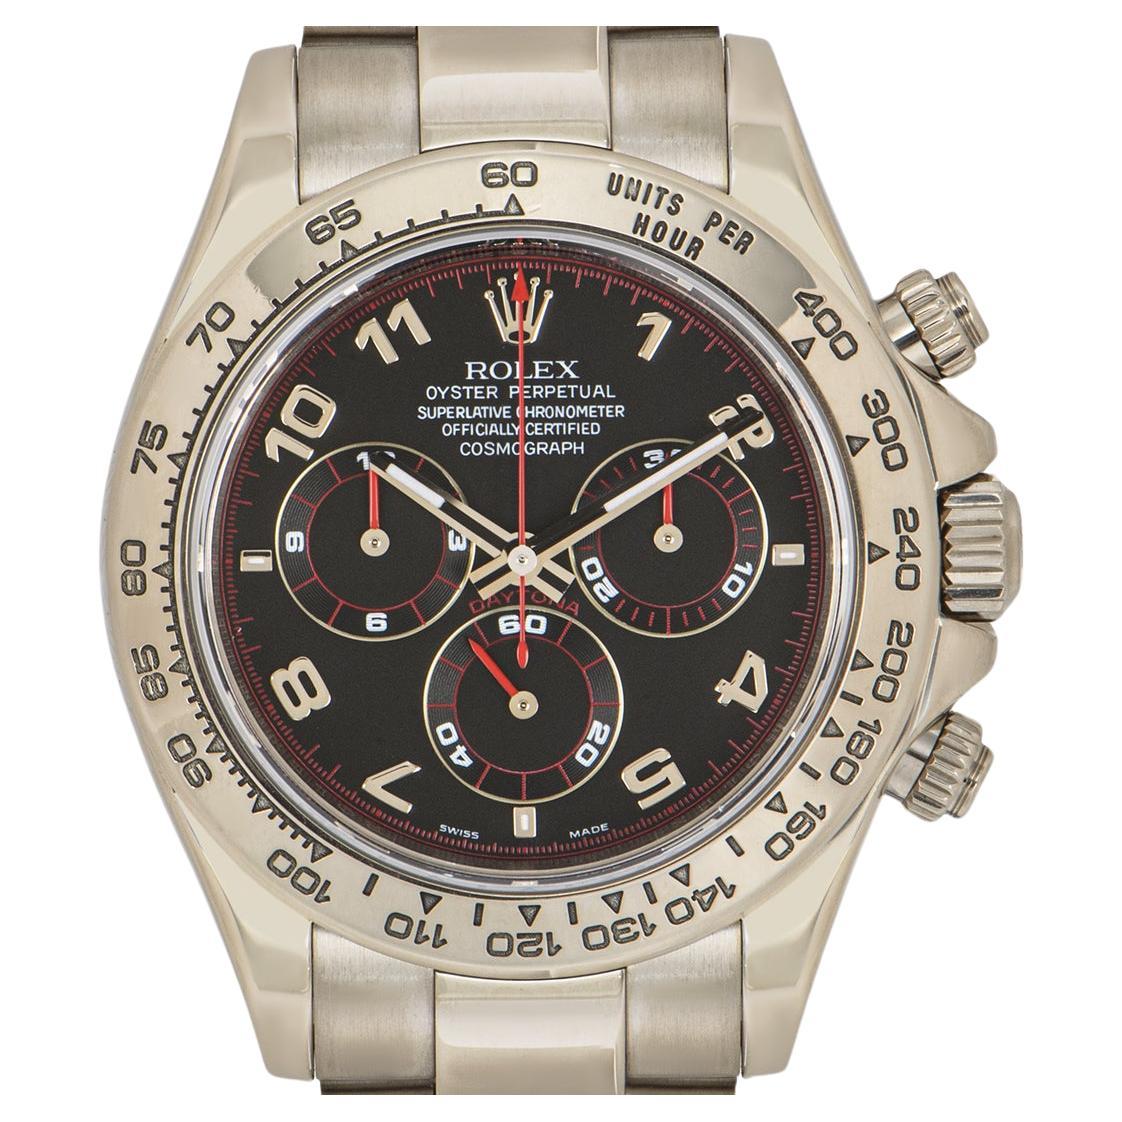 A white gold Daytona from Rolex, featuring a black racing dial with chronograph counters. With an engraved tachymetric scale, three counters and pushers, the Daytona was designed to be the ultimate timing tool for endurance racing drivers.

The